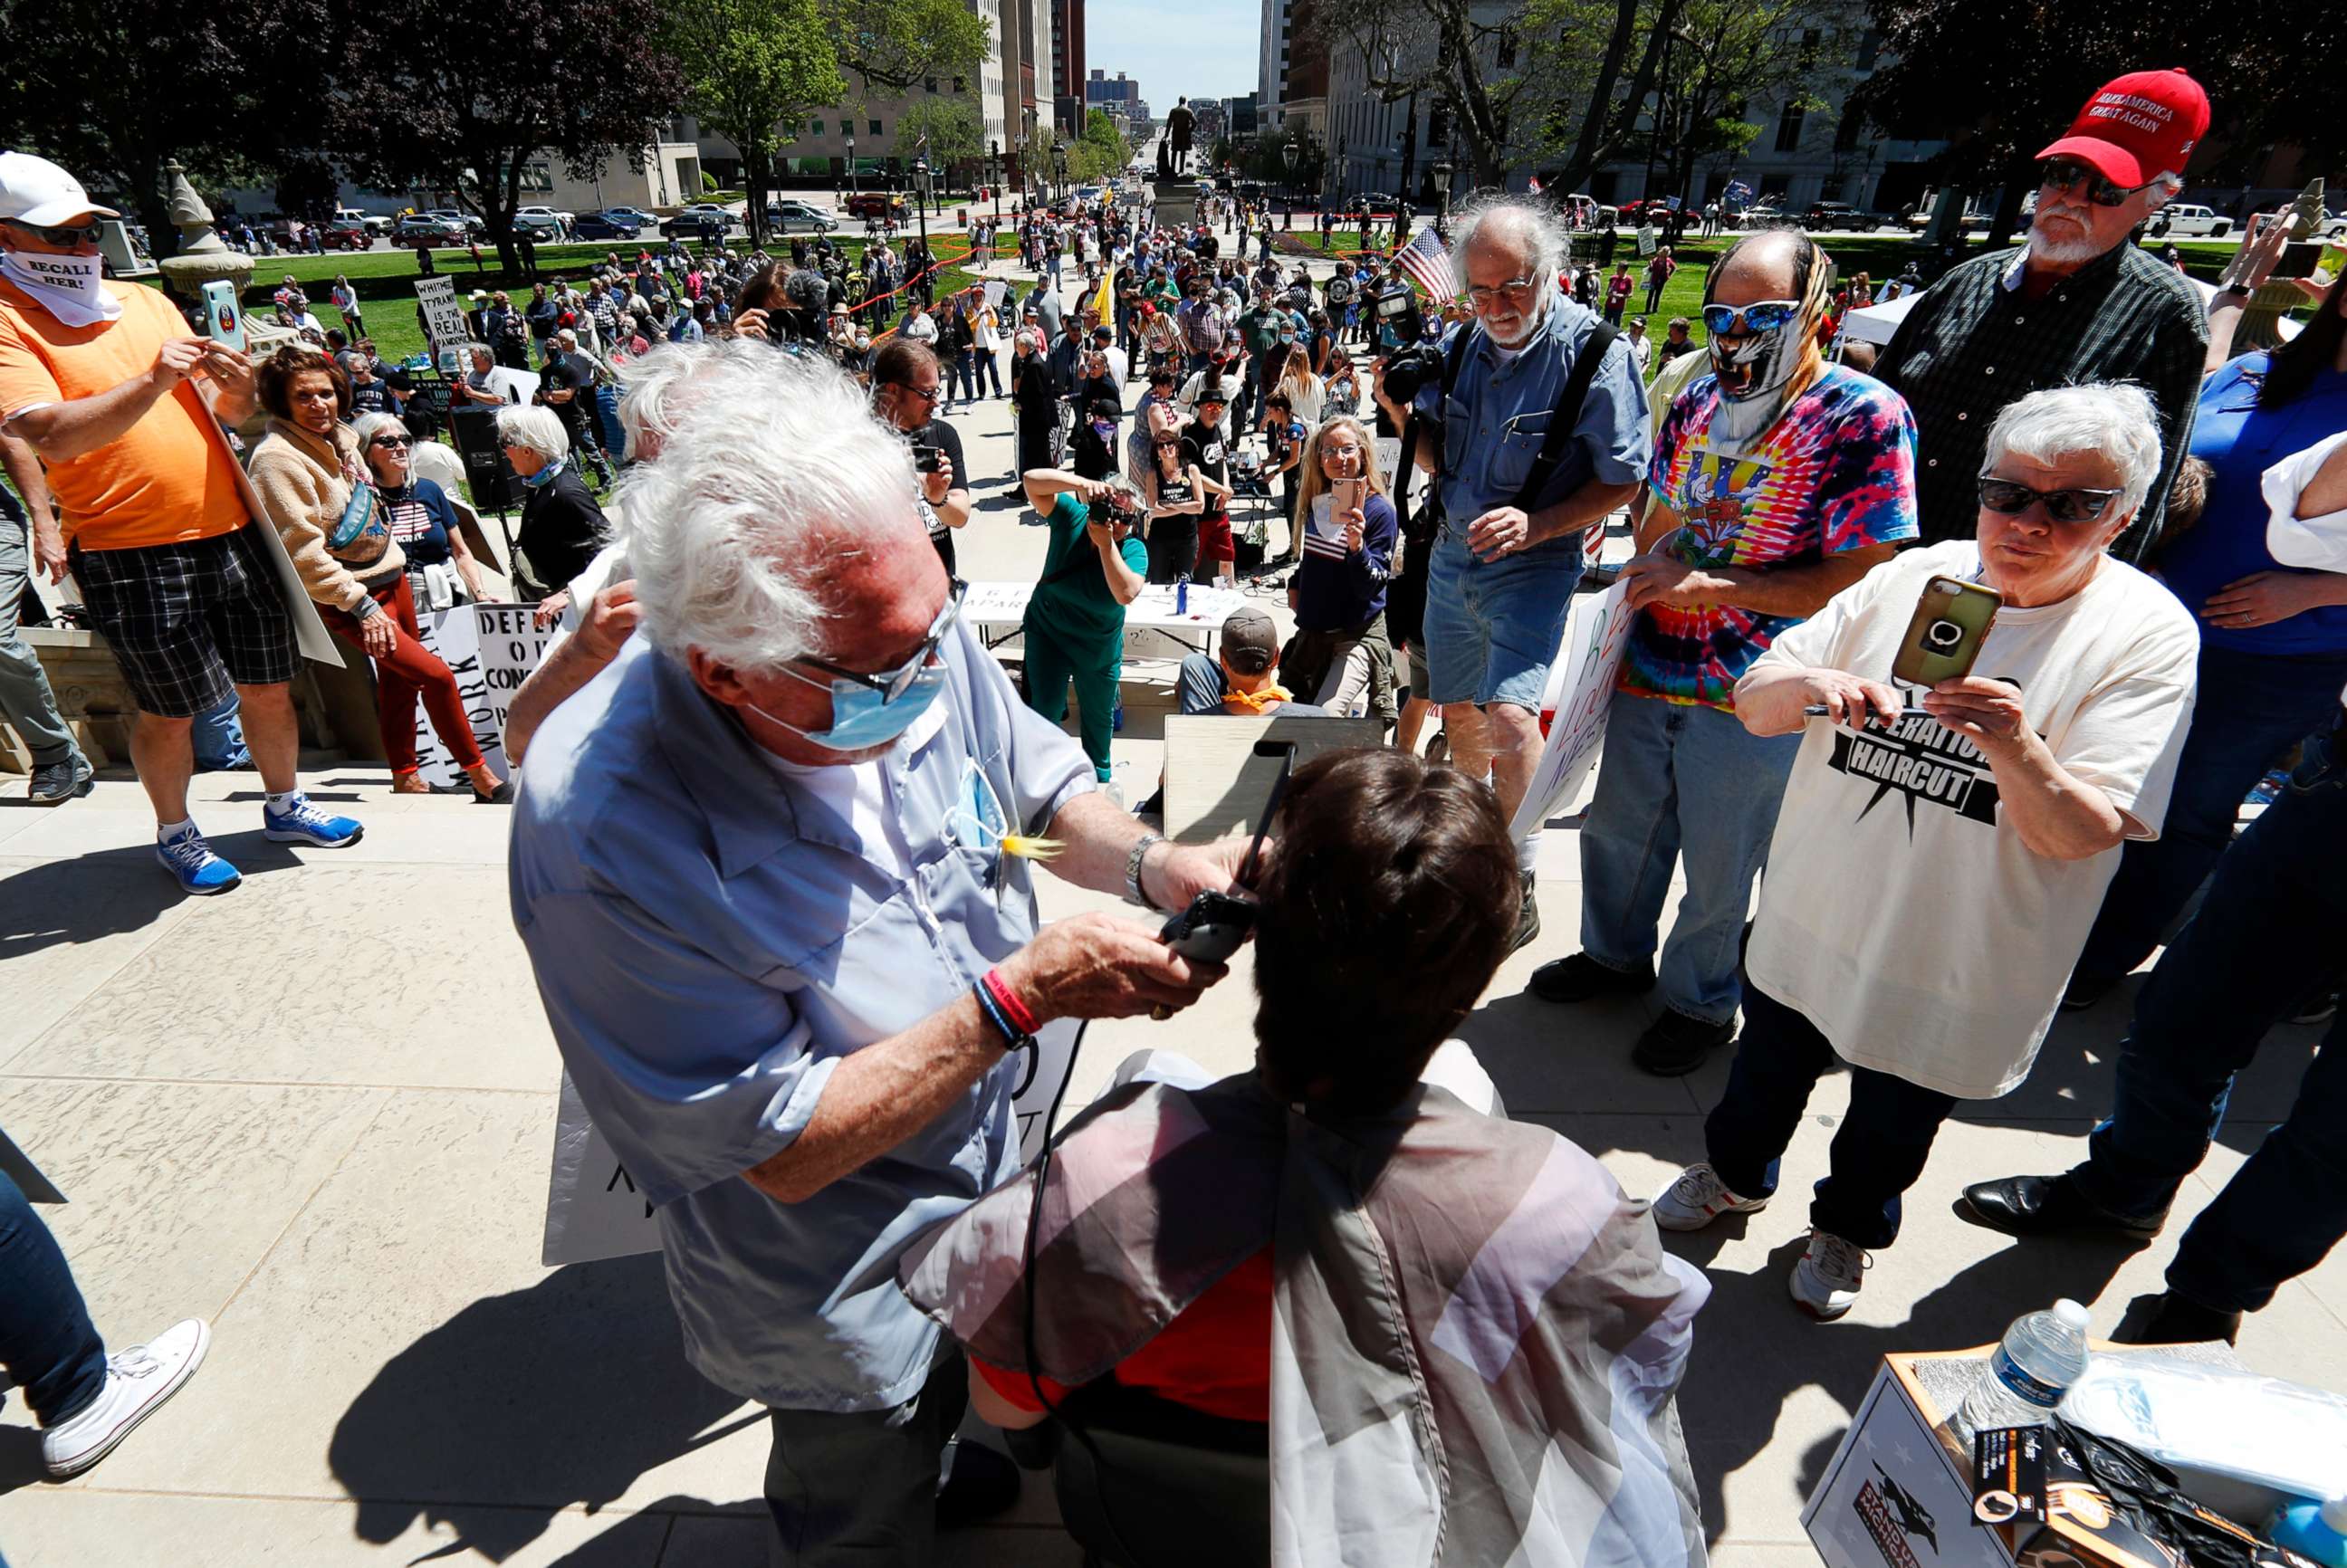 PHOTO: Barber Karl Manke, of Owosso, gives a free haircut on the steps of the State Capitol during a rally in Lansing, Mich., May 20, 2020.